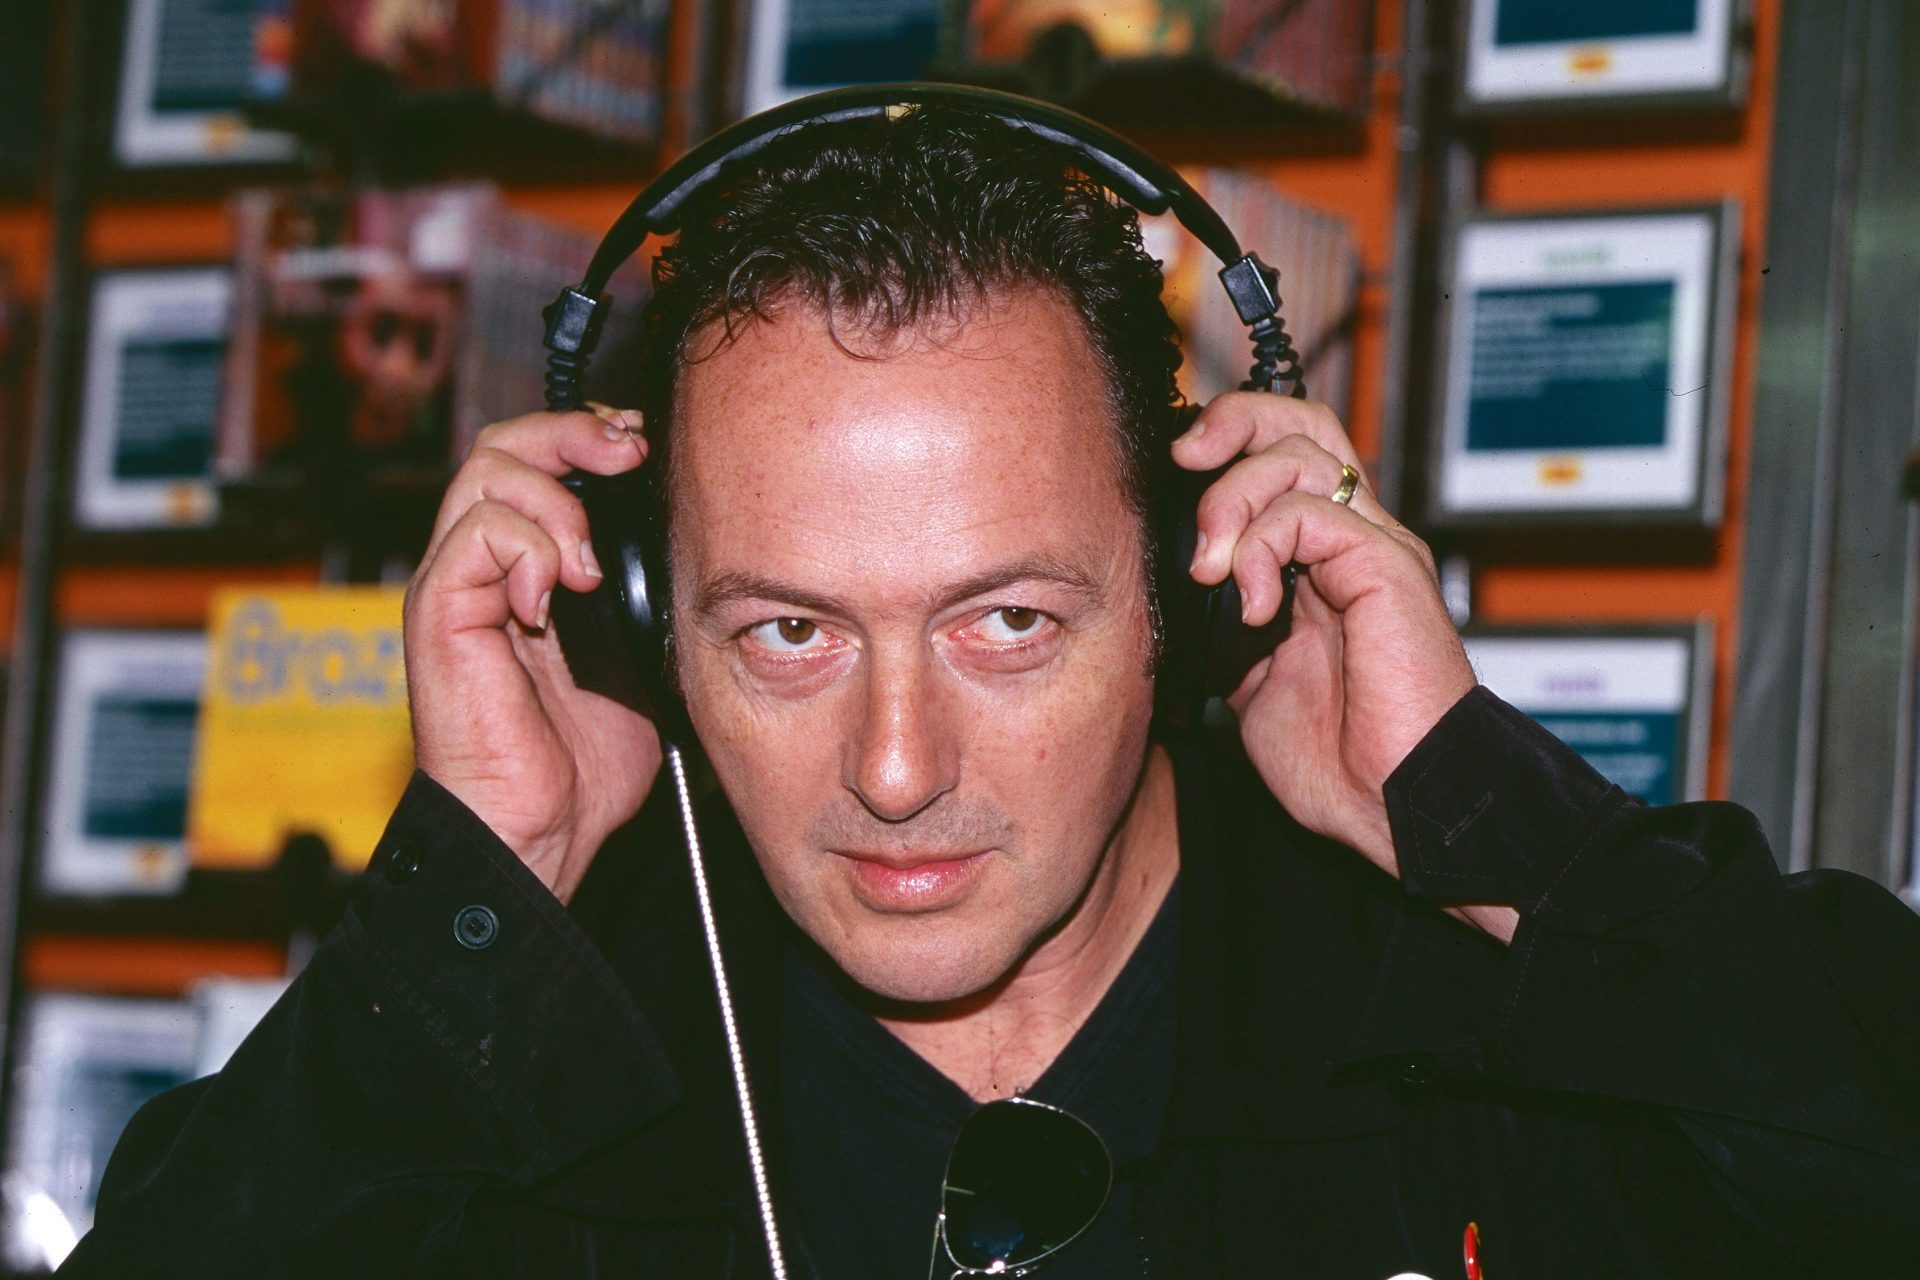 <p>It wasn't all sunshine and roses for the band. Legendary DJ John Peel and iconic singer Joe Strummer criticized Genesis for being boring and selling out, while fans of different iterations of the band reportedly hate one another. These are criticisms that have been leveled at Phil Collins during his solo career as well.</p>